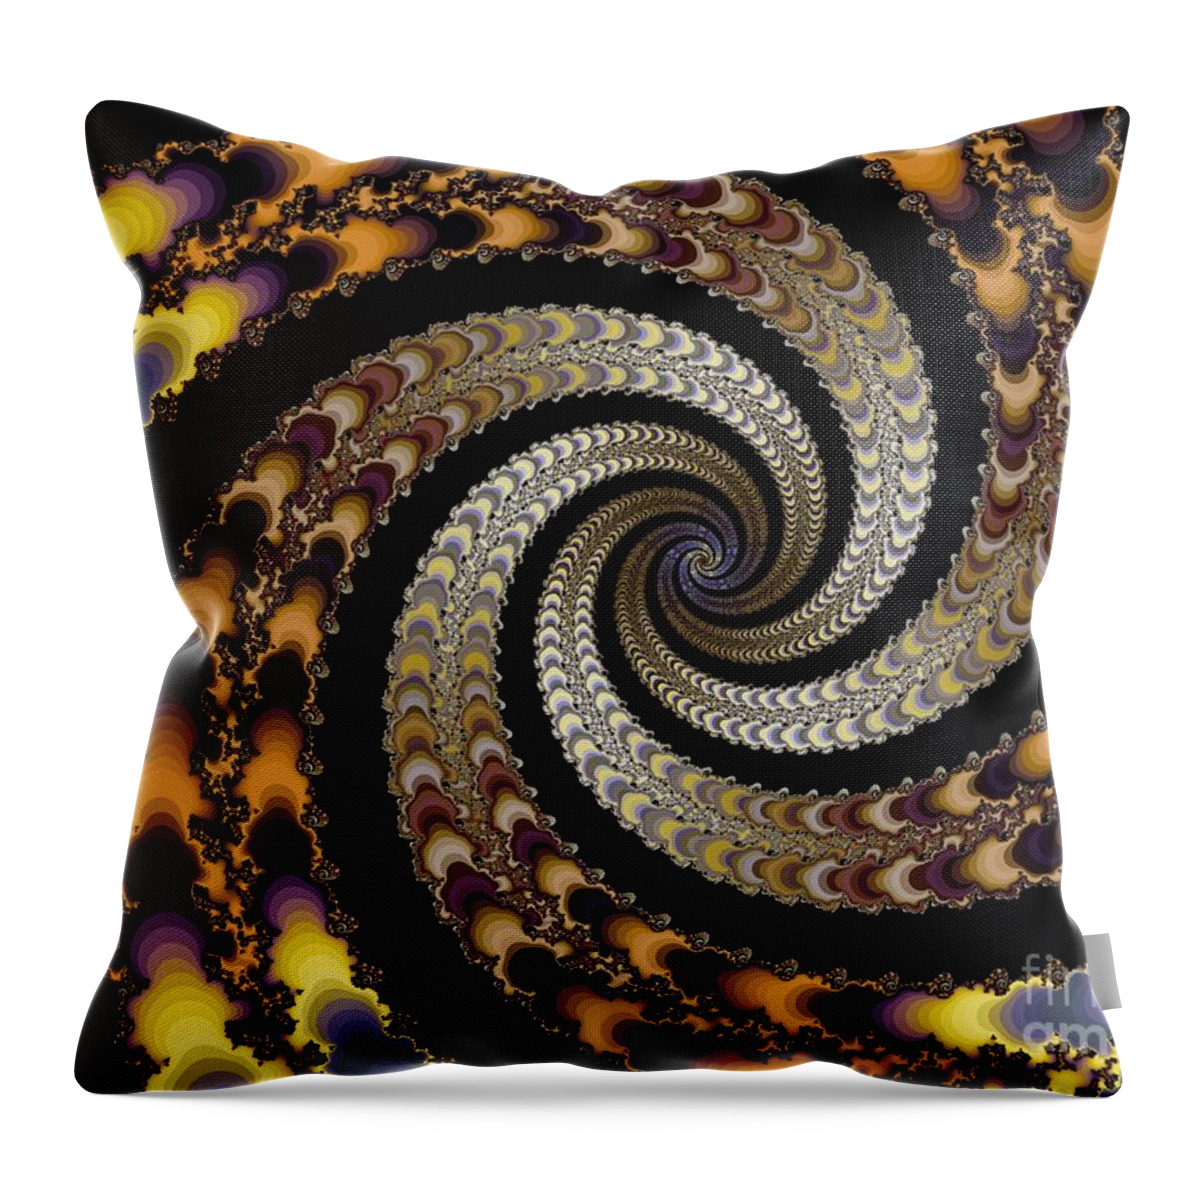 Infinity Throw Pillow featuring the digital art Infinity by Elizabeth McTaggart